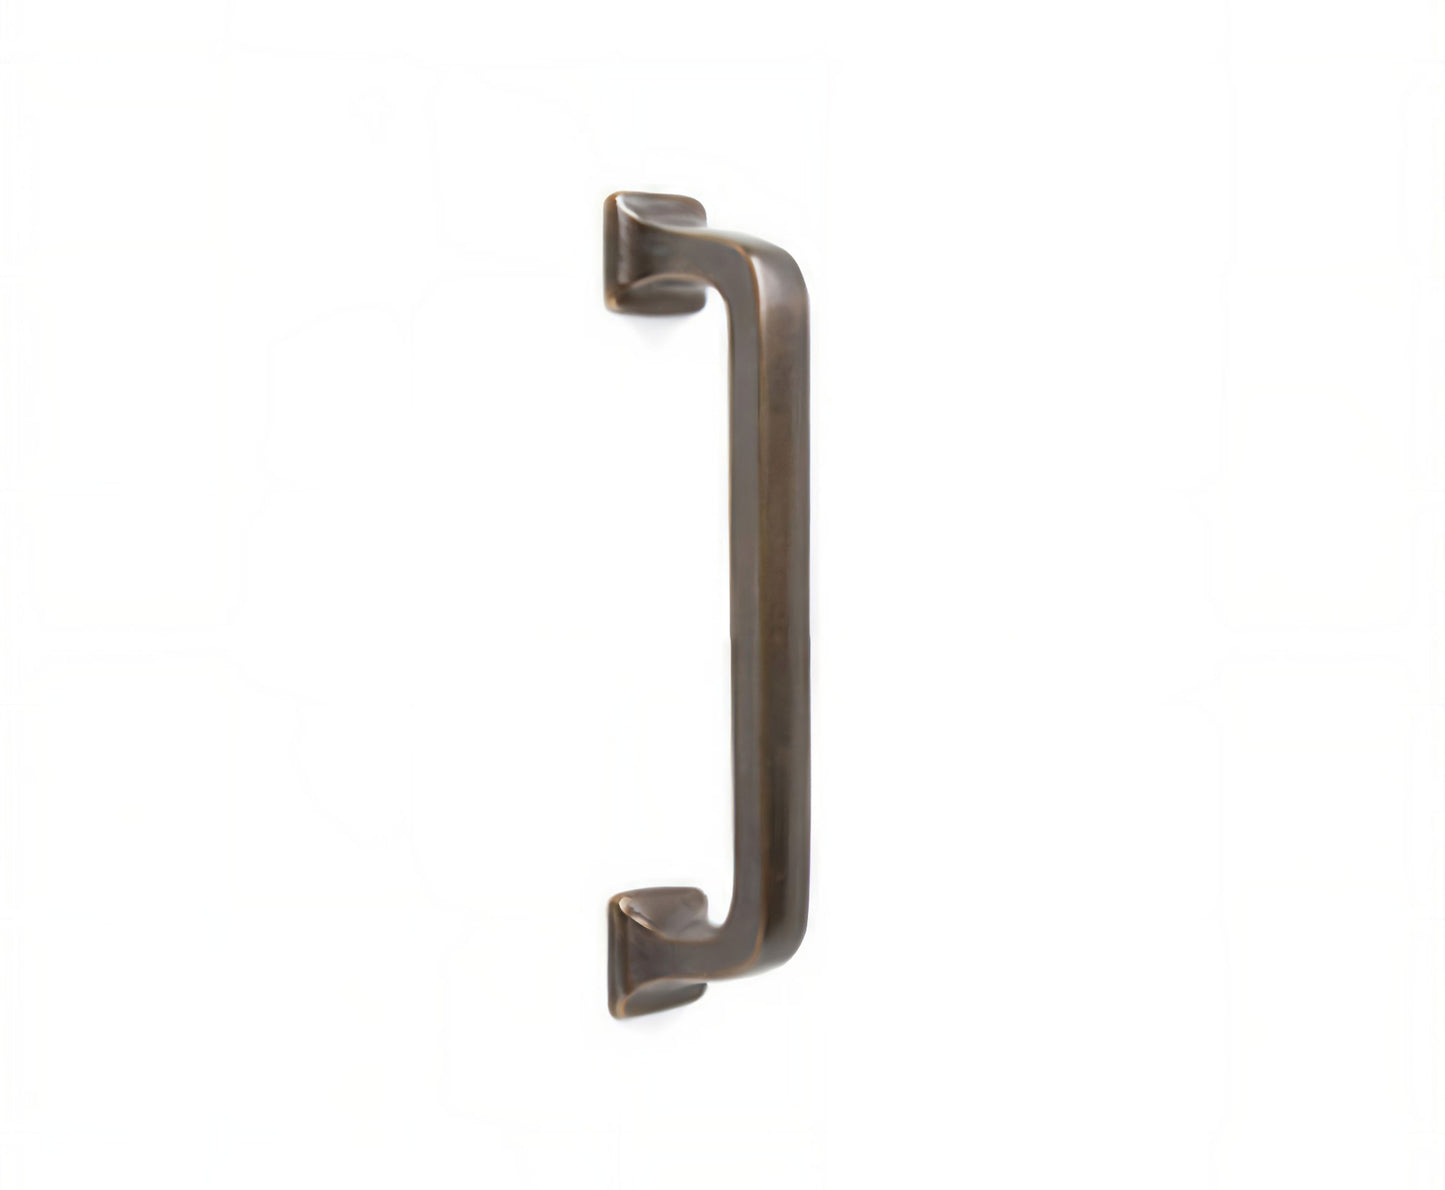 SQUARE HANDLE CABINET PULL 545